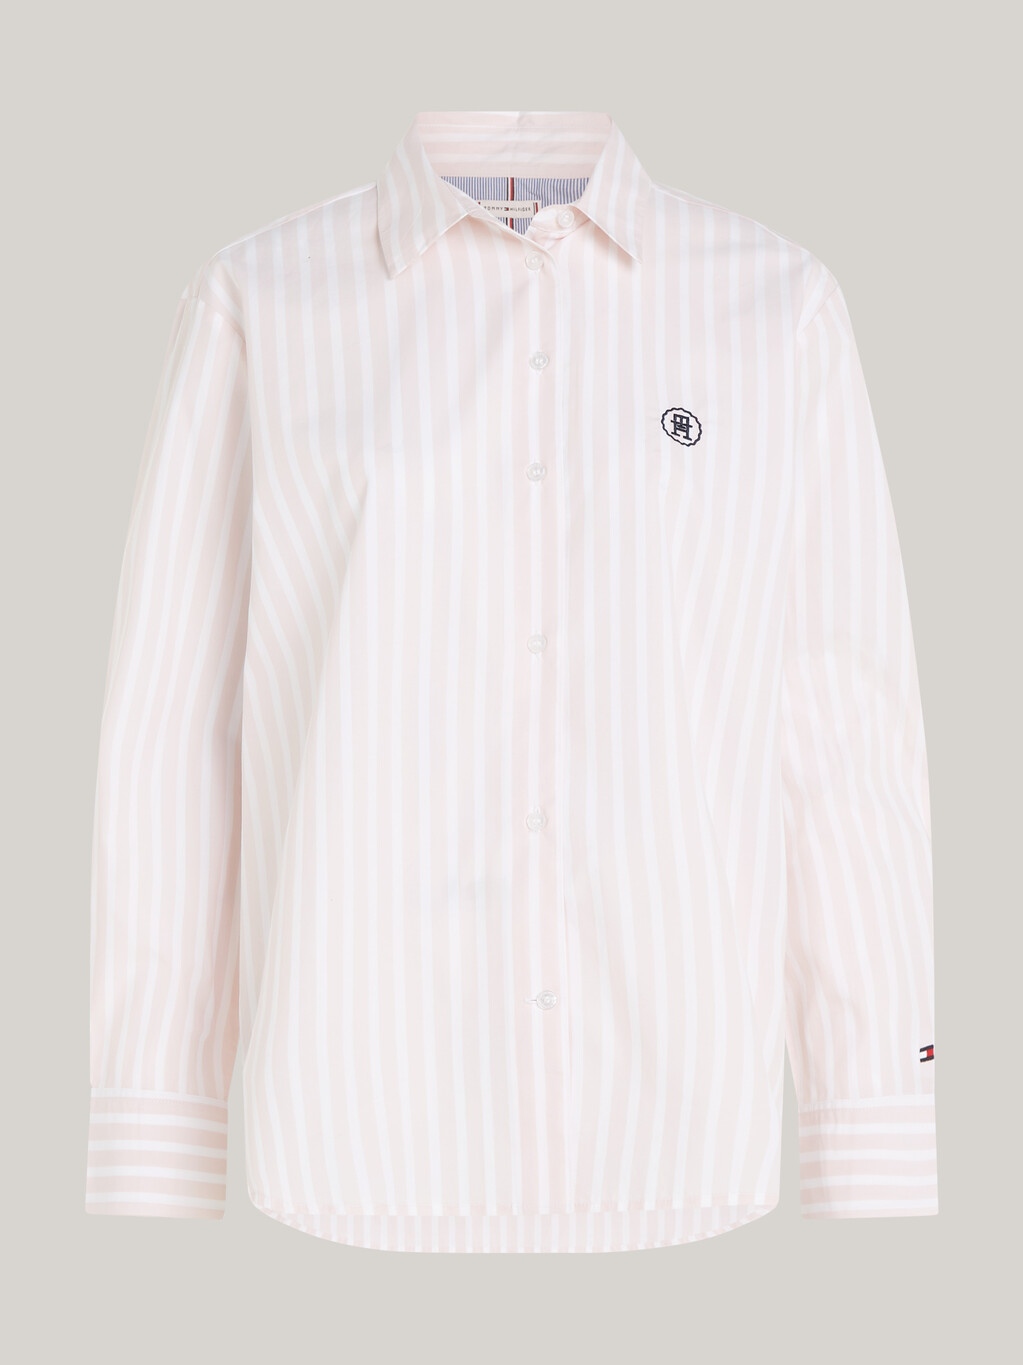 TH Monogram Stamp Relaxed Stripe Shirt, Bold Stp/ Whimsy Pink, hi-res